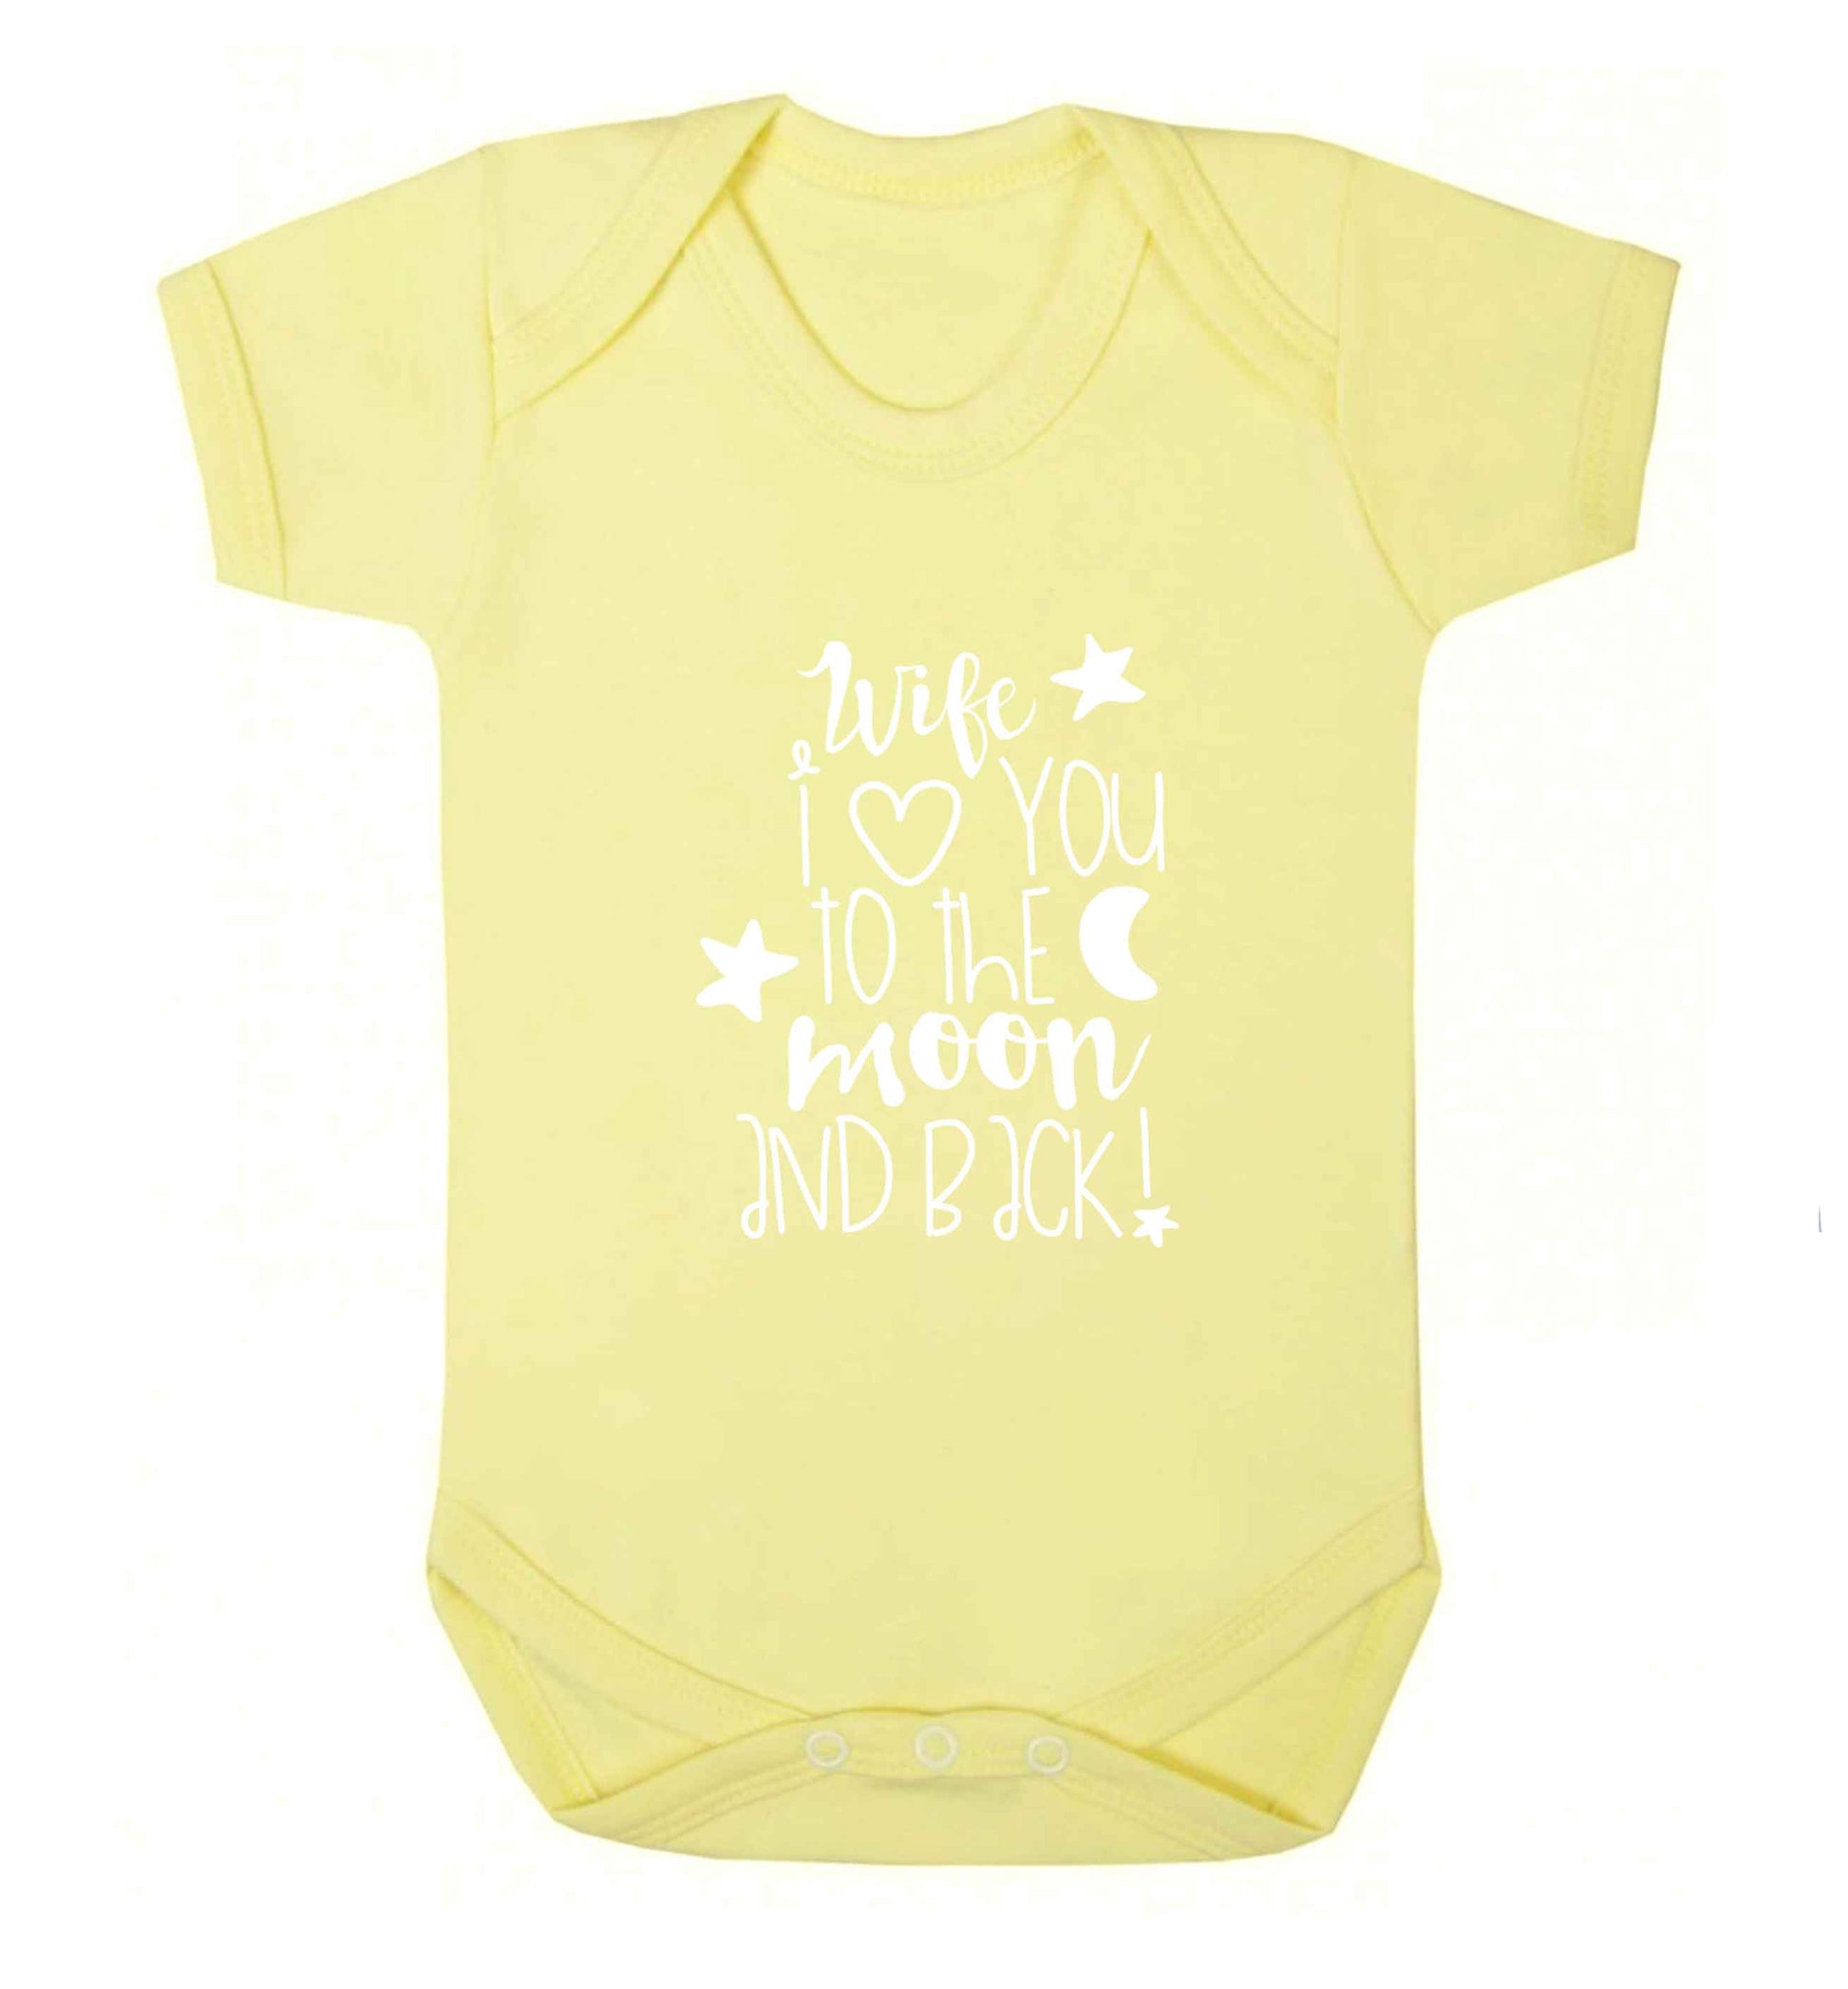 Wife I love you to the moon and back baby vest pale yellow 18-24 months